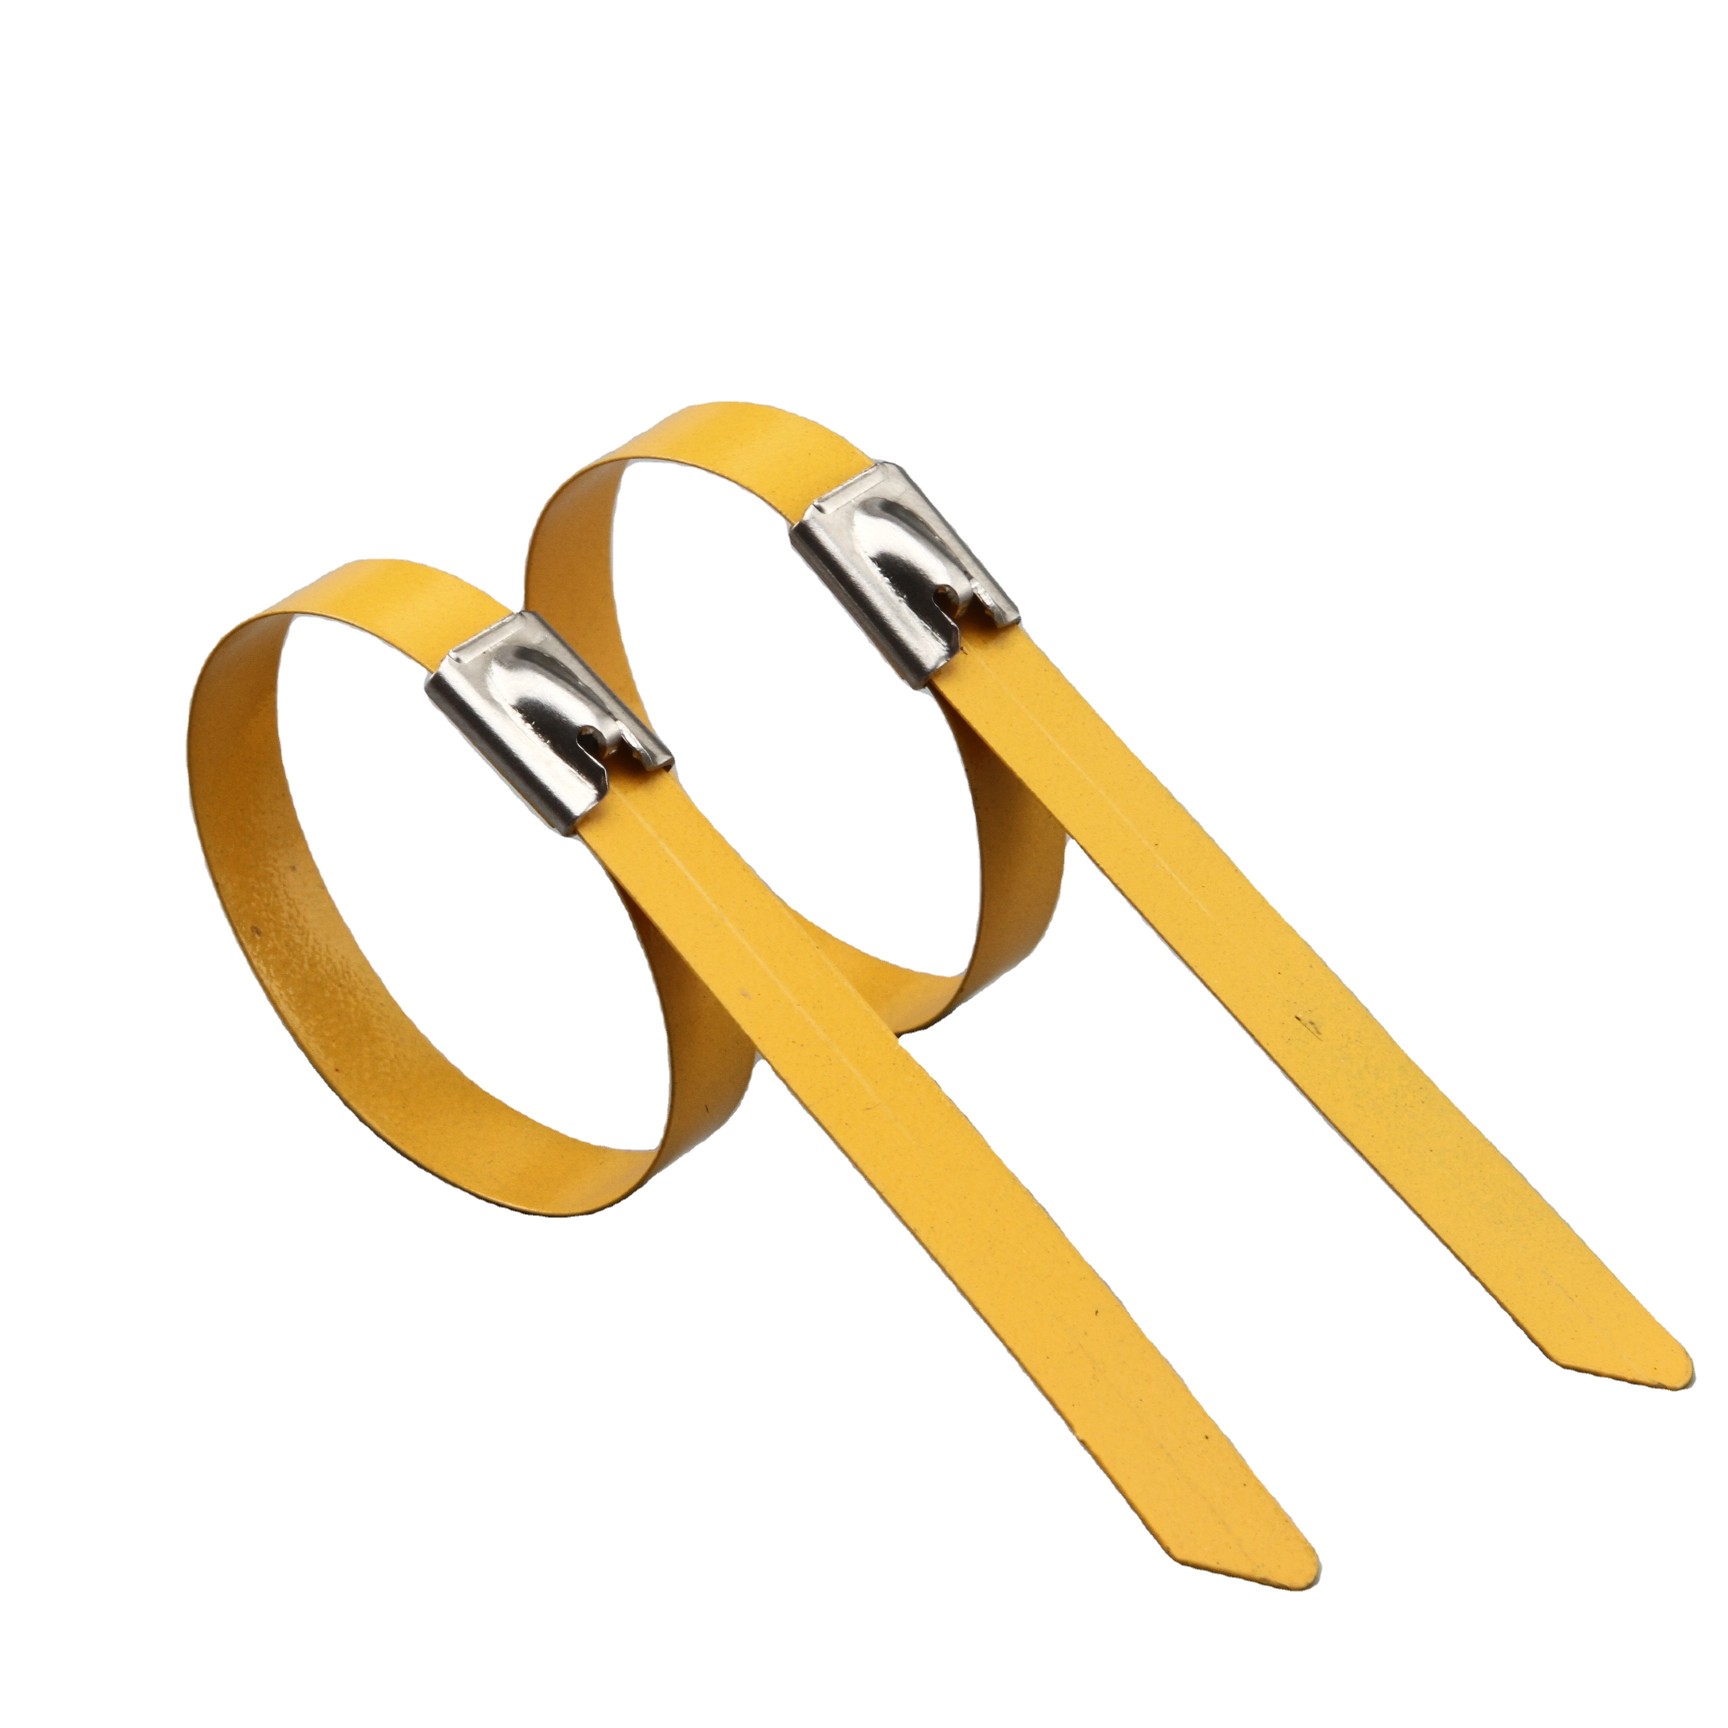 Self-locking Stainless Steel Epoxy Coated Cable Ties - 0